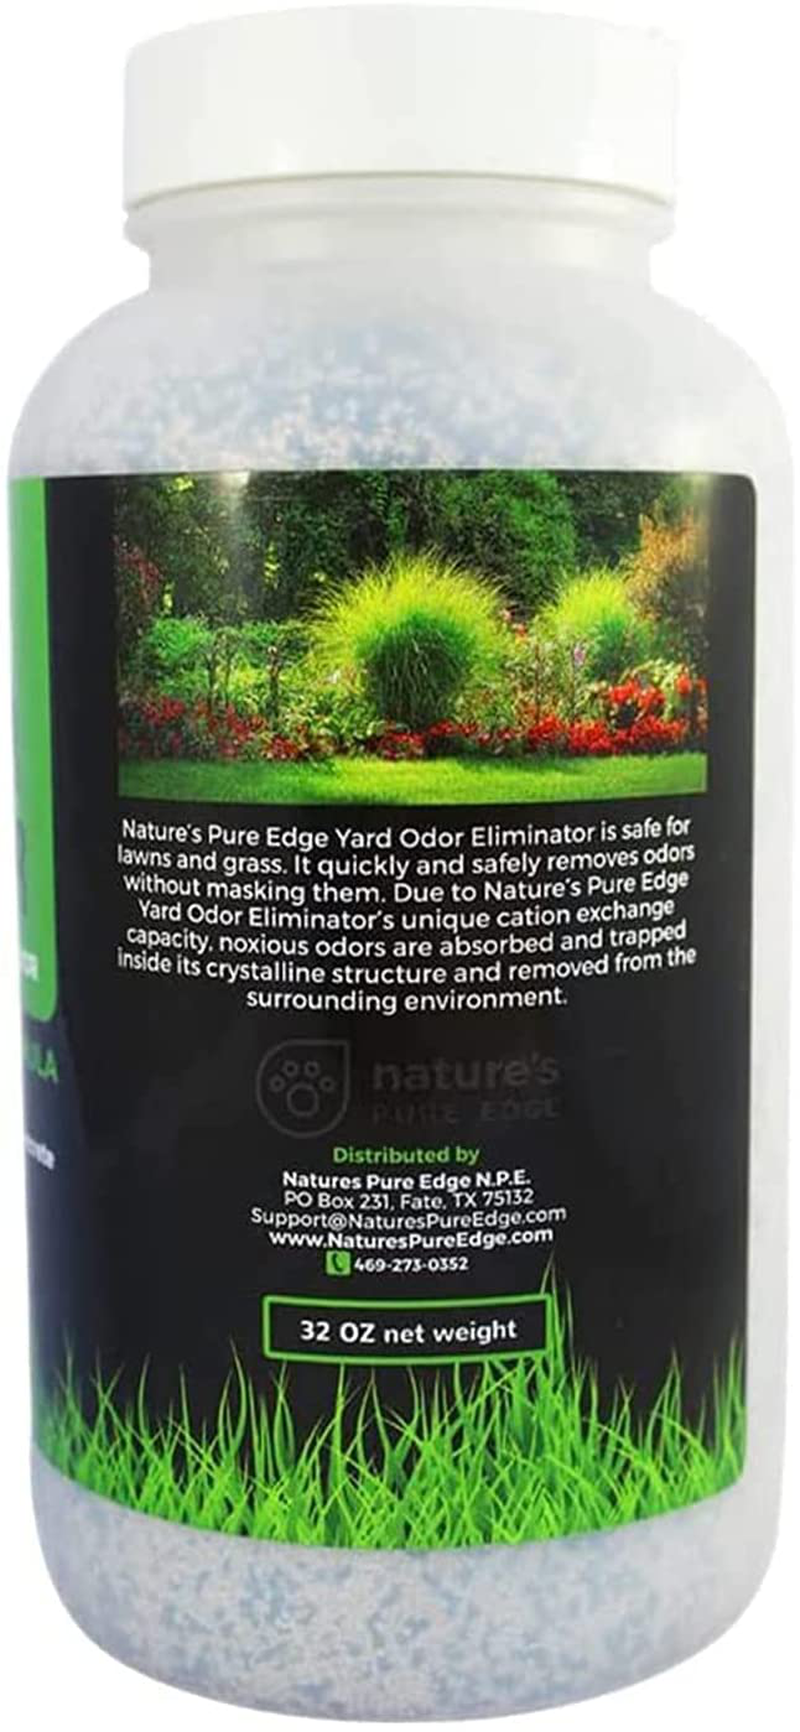 Nature'S Pure Edge Yard Odor Eliminator. Perfect for Artificial Grass, Patio, Kennel, and Lawn. Instantly Removes Stool and Urine Odor. Long Lasting. Kid and Pet Safe. Animals & Pet Supplies > Pet Supplies > Dog Supplies > Dog Kennels & Runs Nature's Pure Edge   